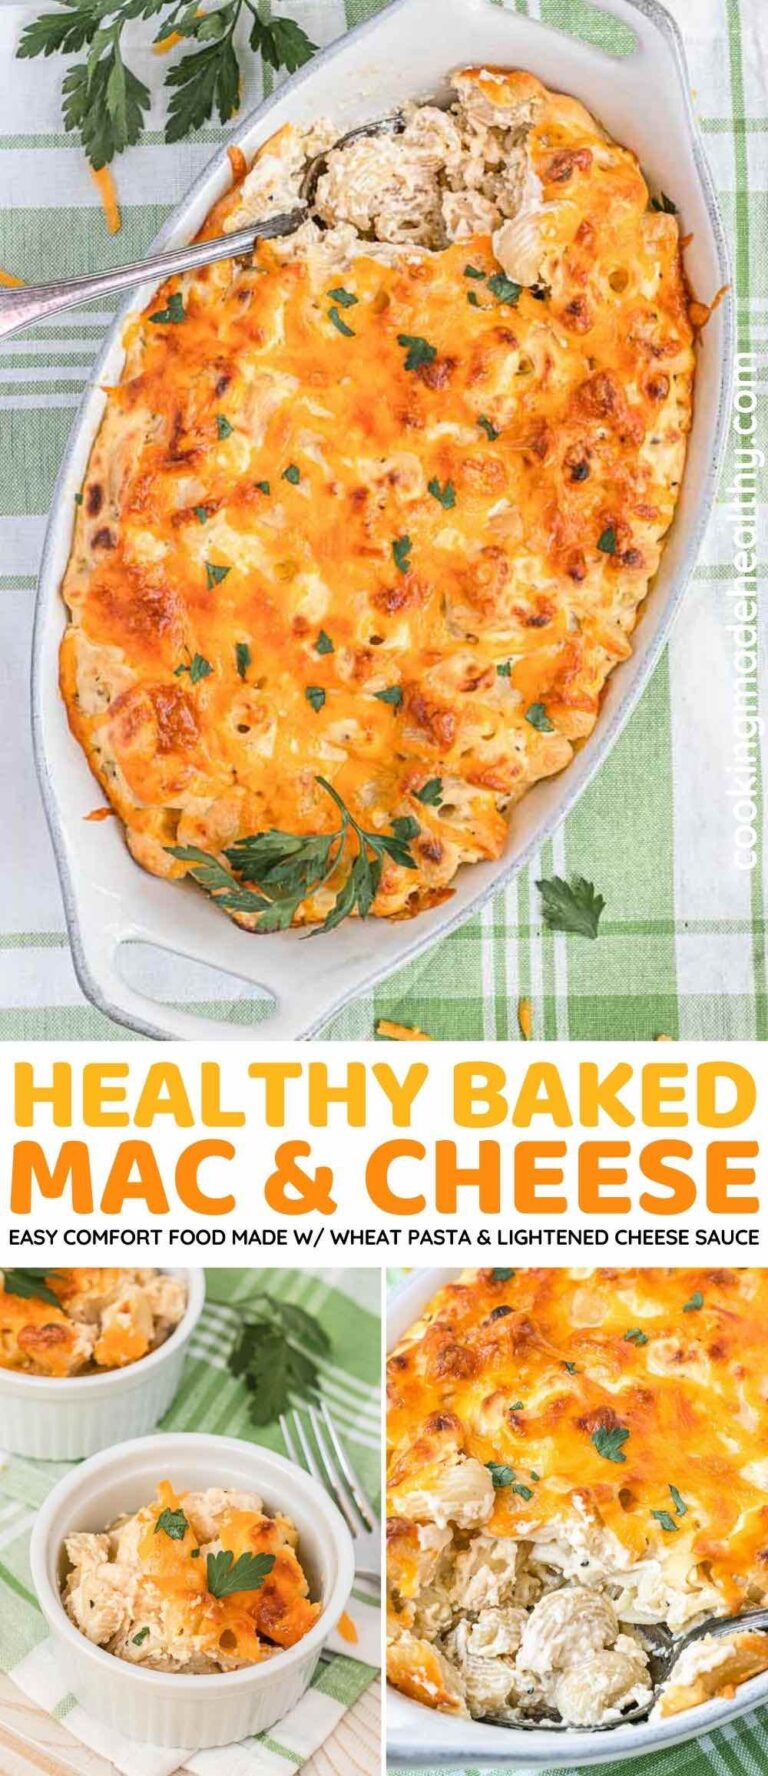 Healthy Baked Macaroni and Cheese Recipe - Cooking Made Healthy